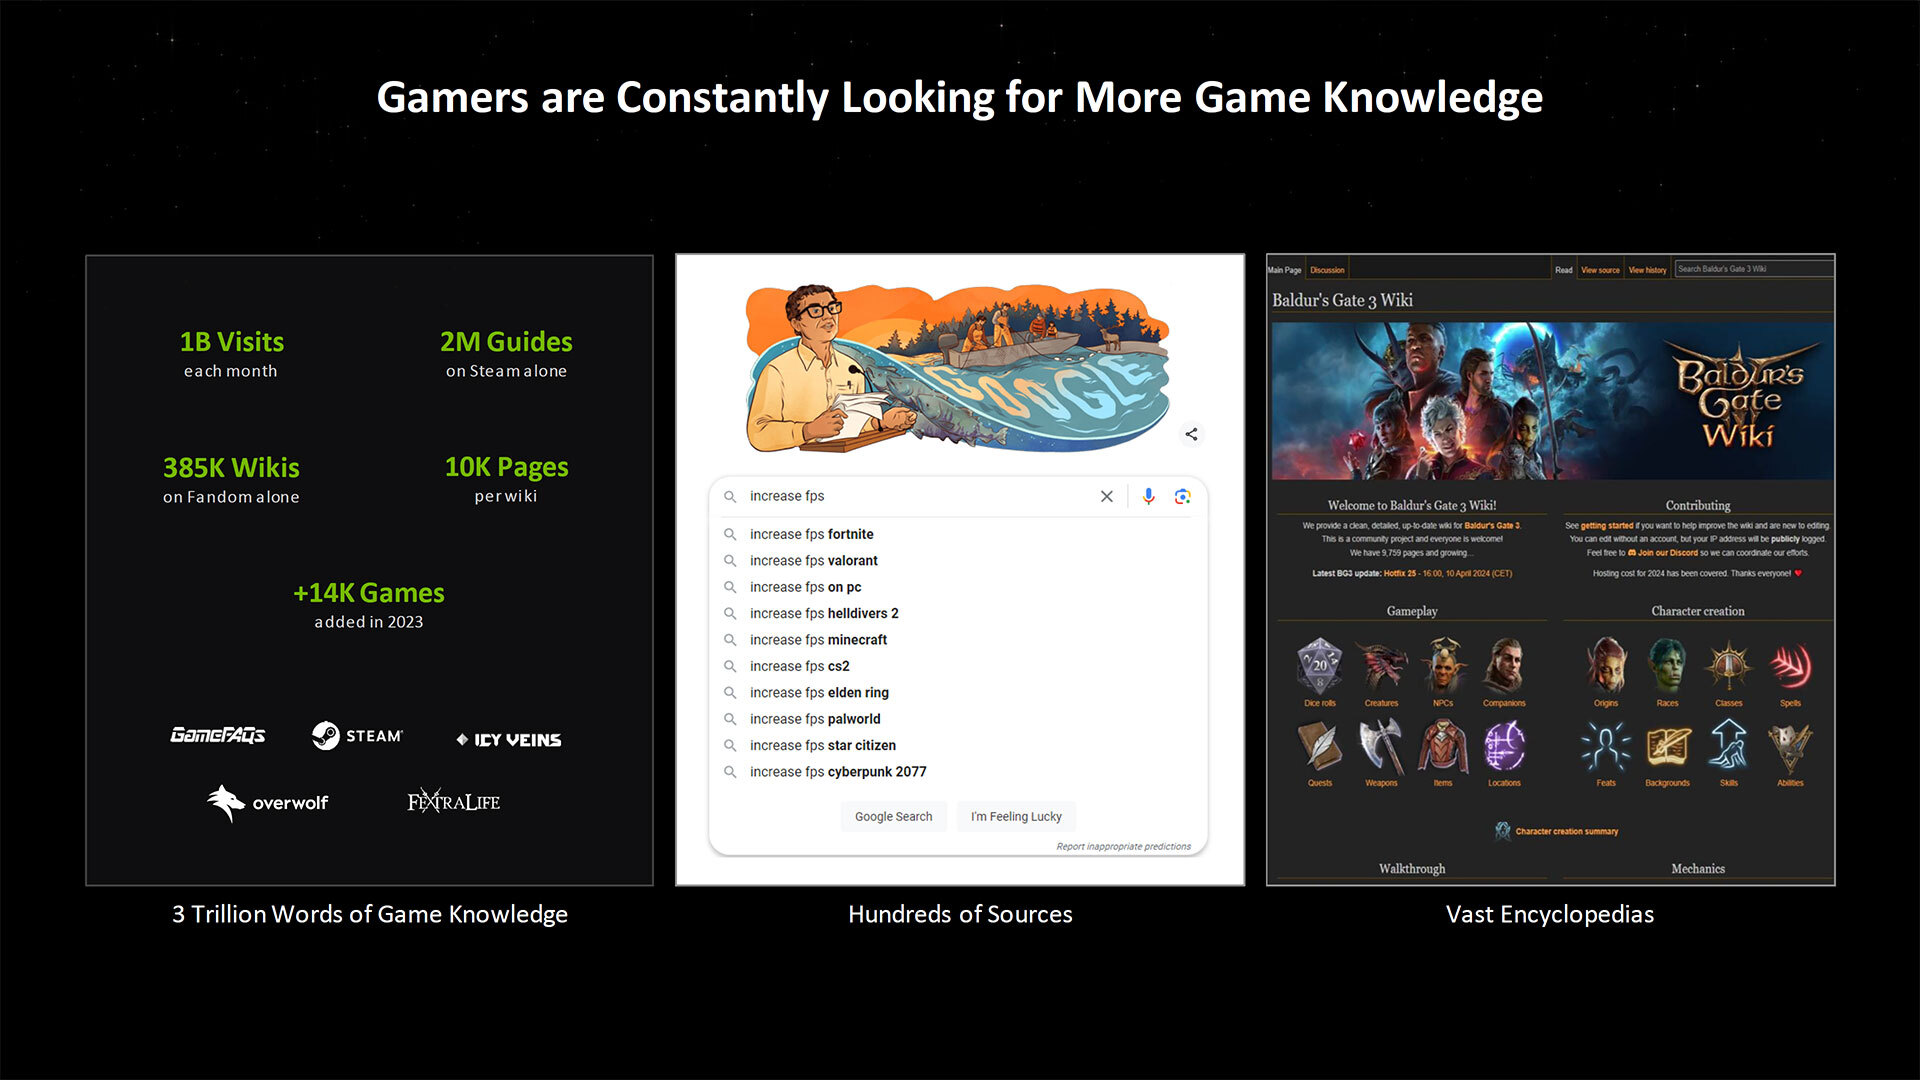 Gamers are constantly looking for more game knowledge